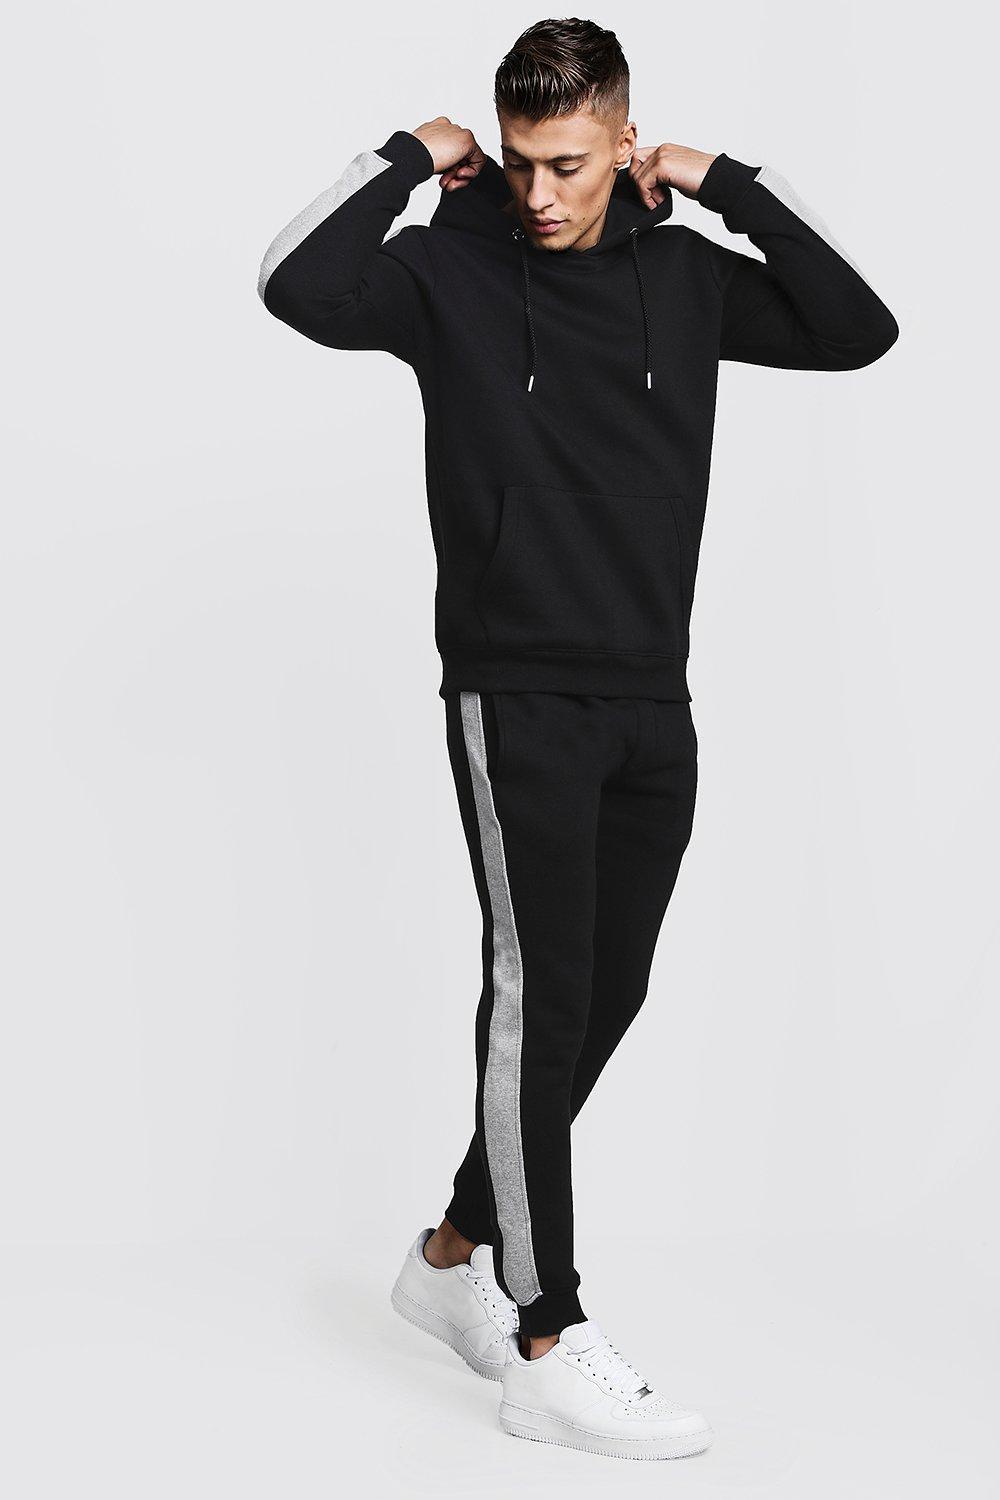 Boohoo Hooded Tracksuit With Colour Block Sleeves for Men - Lyst